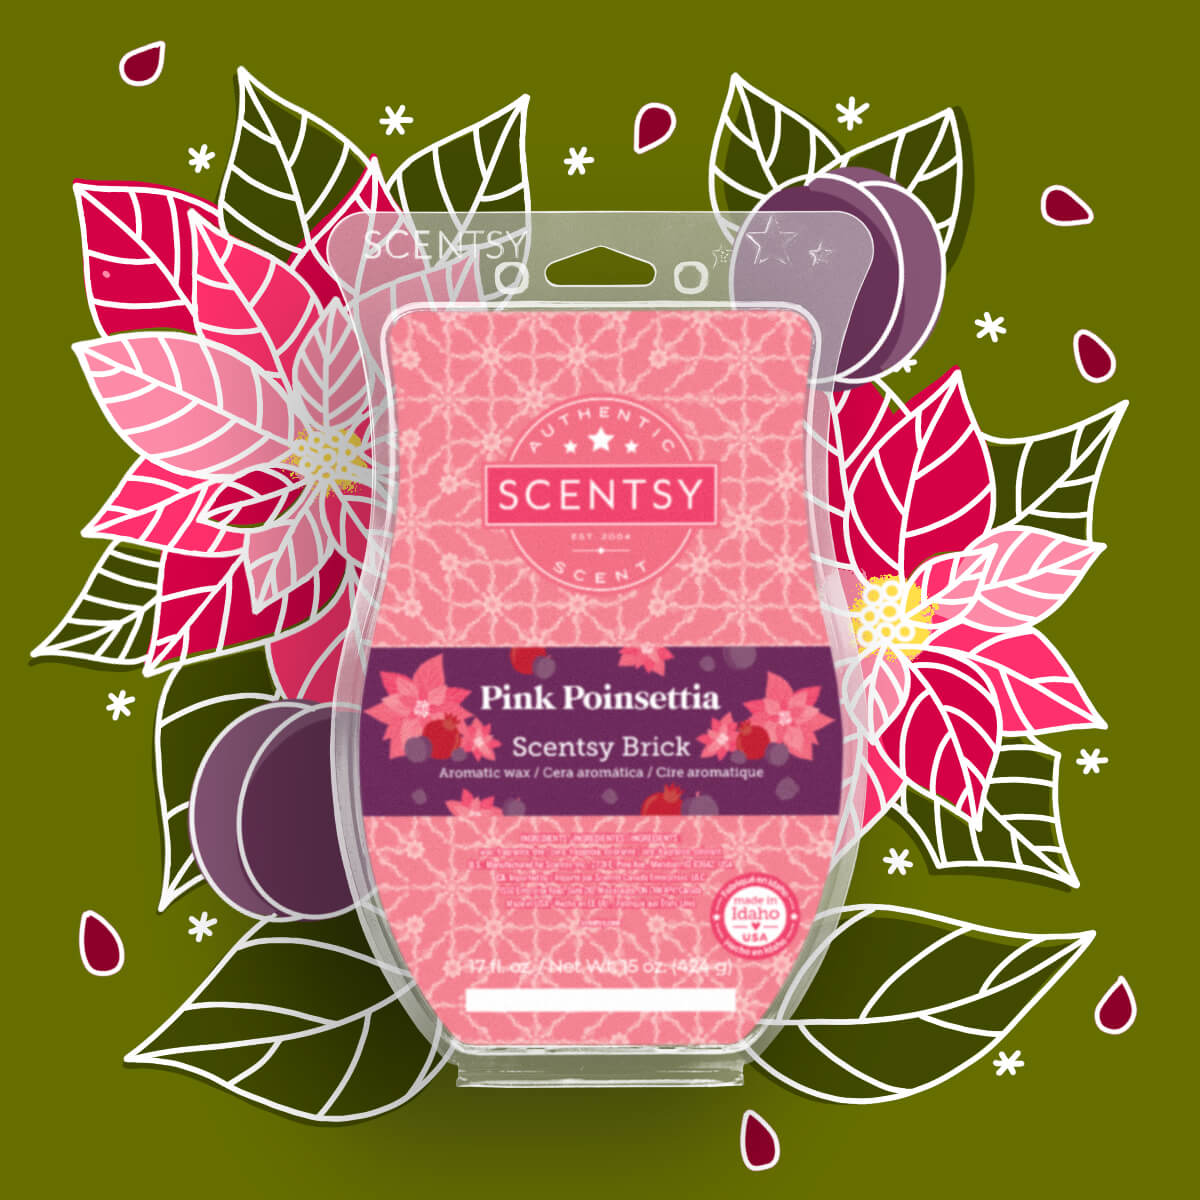 Scents of the Season Scentsy Wax Bar Collection - The Safest Candles